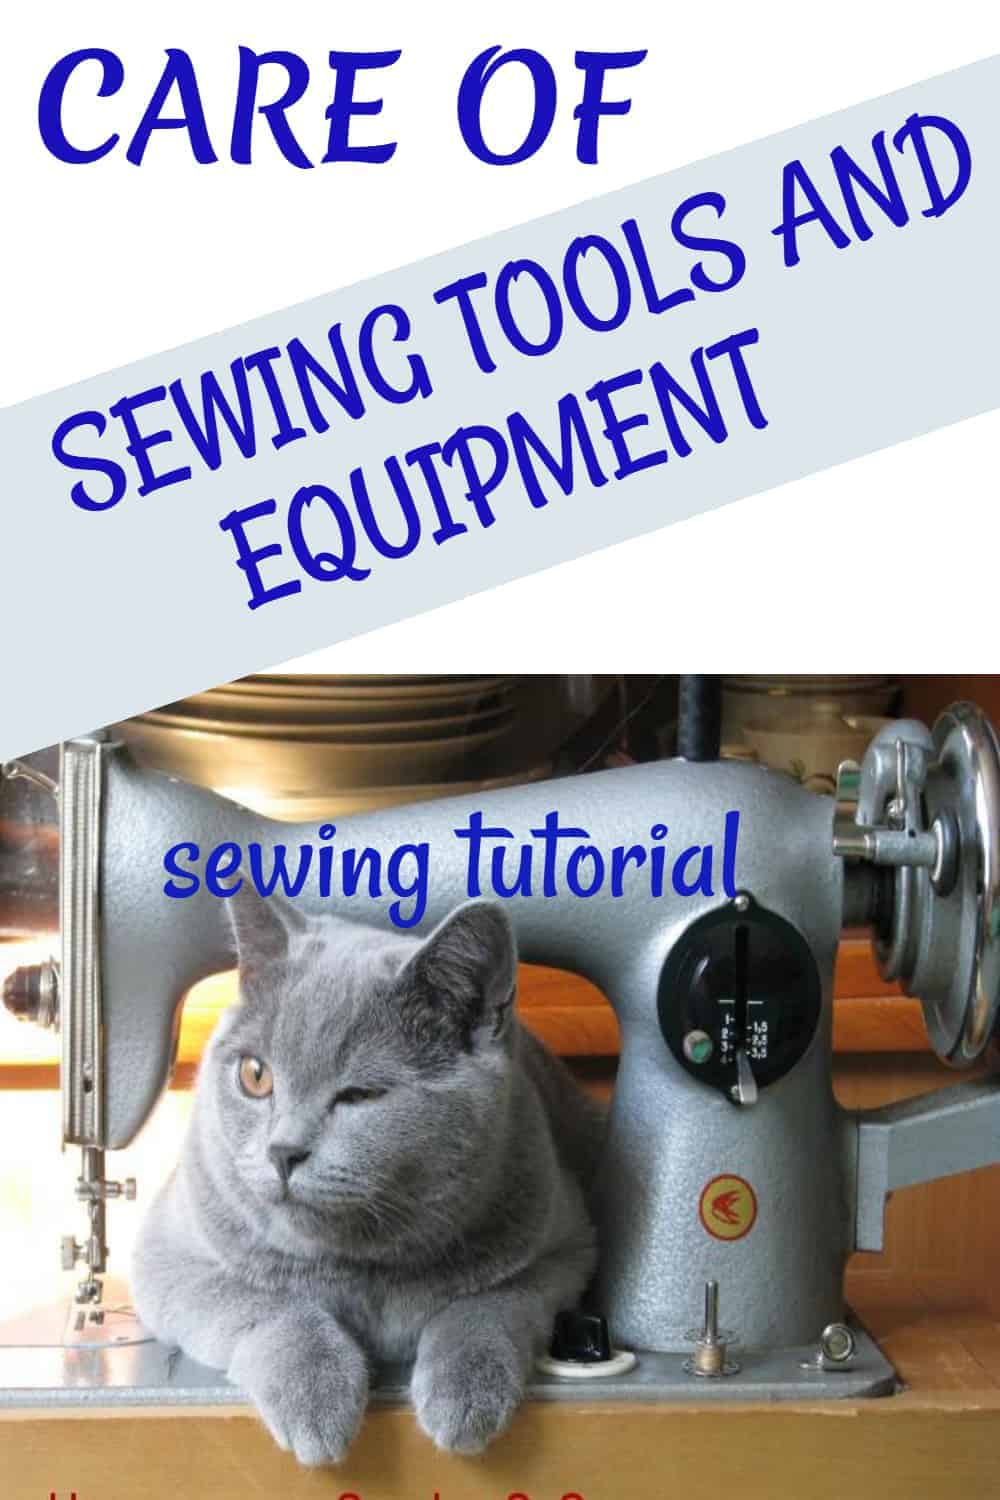 Care of sewing tools and equipment tutorial pin image